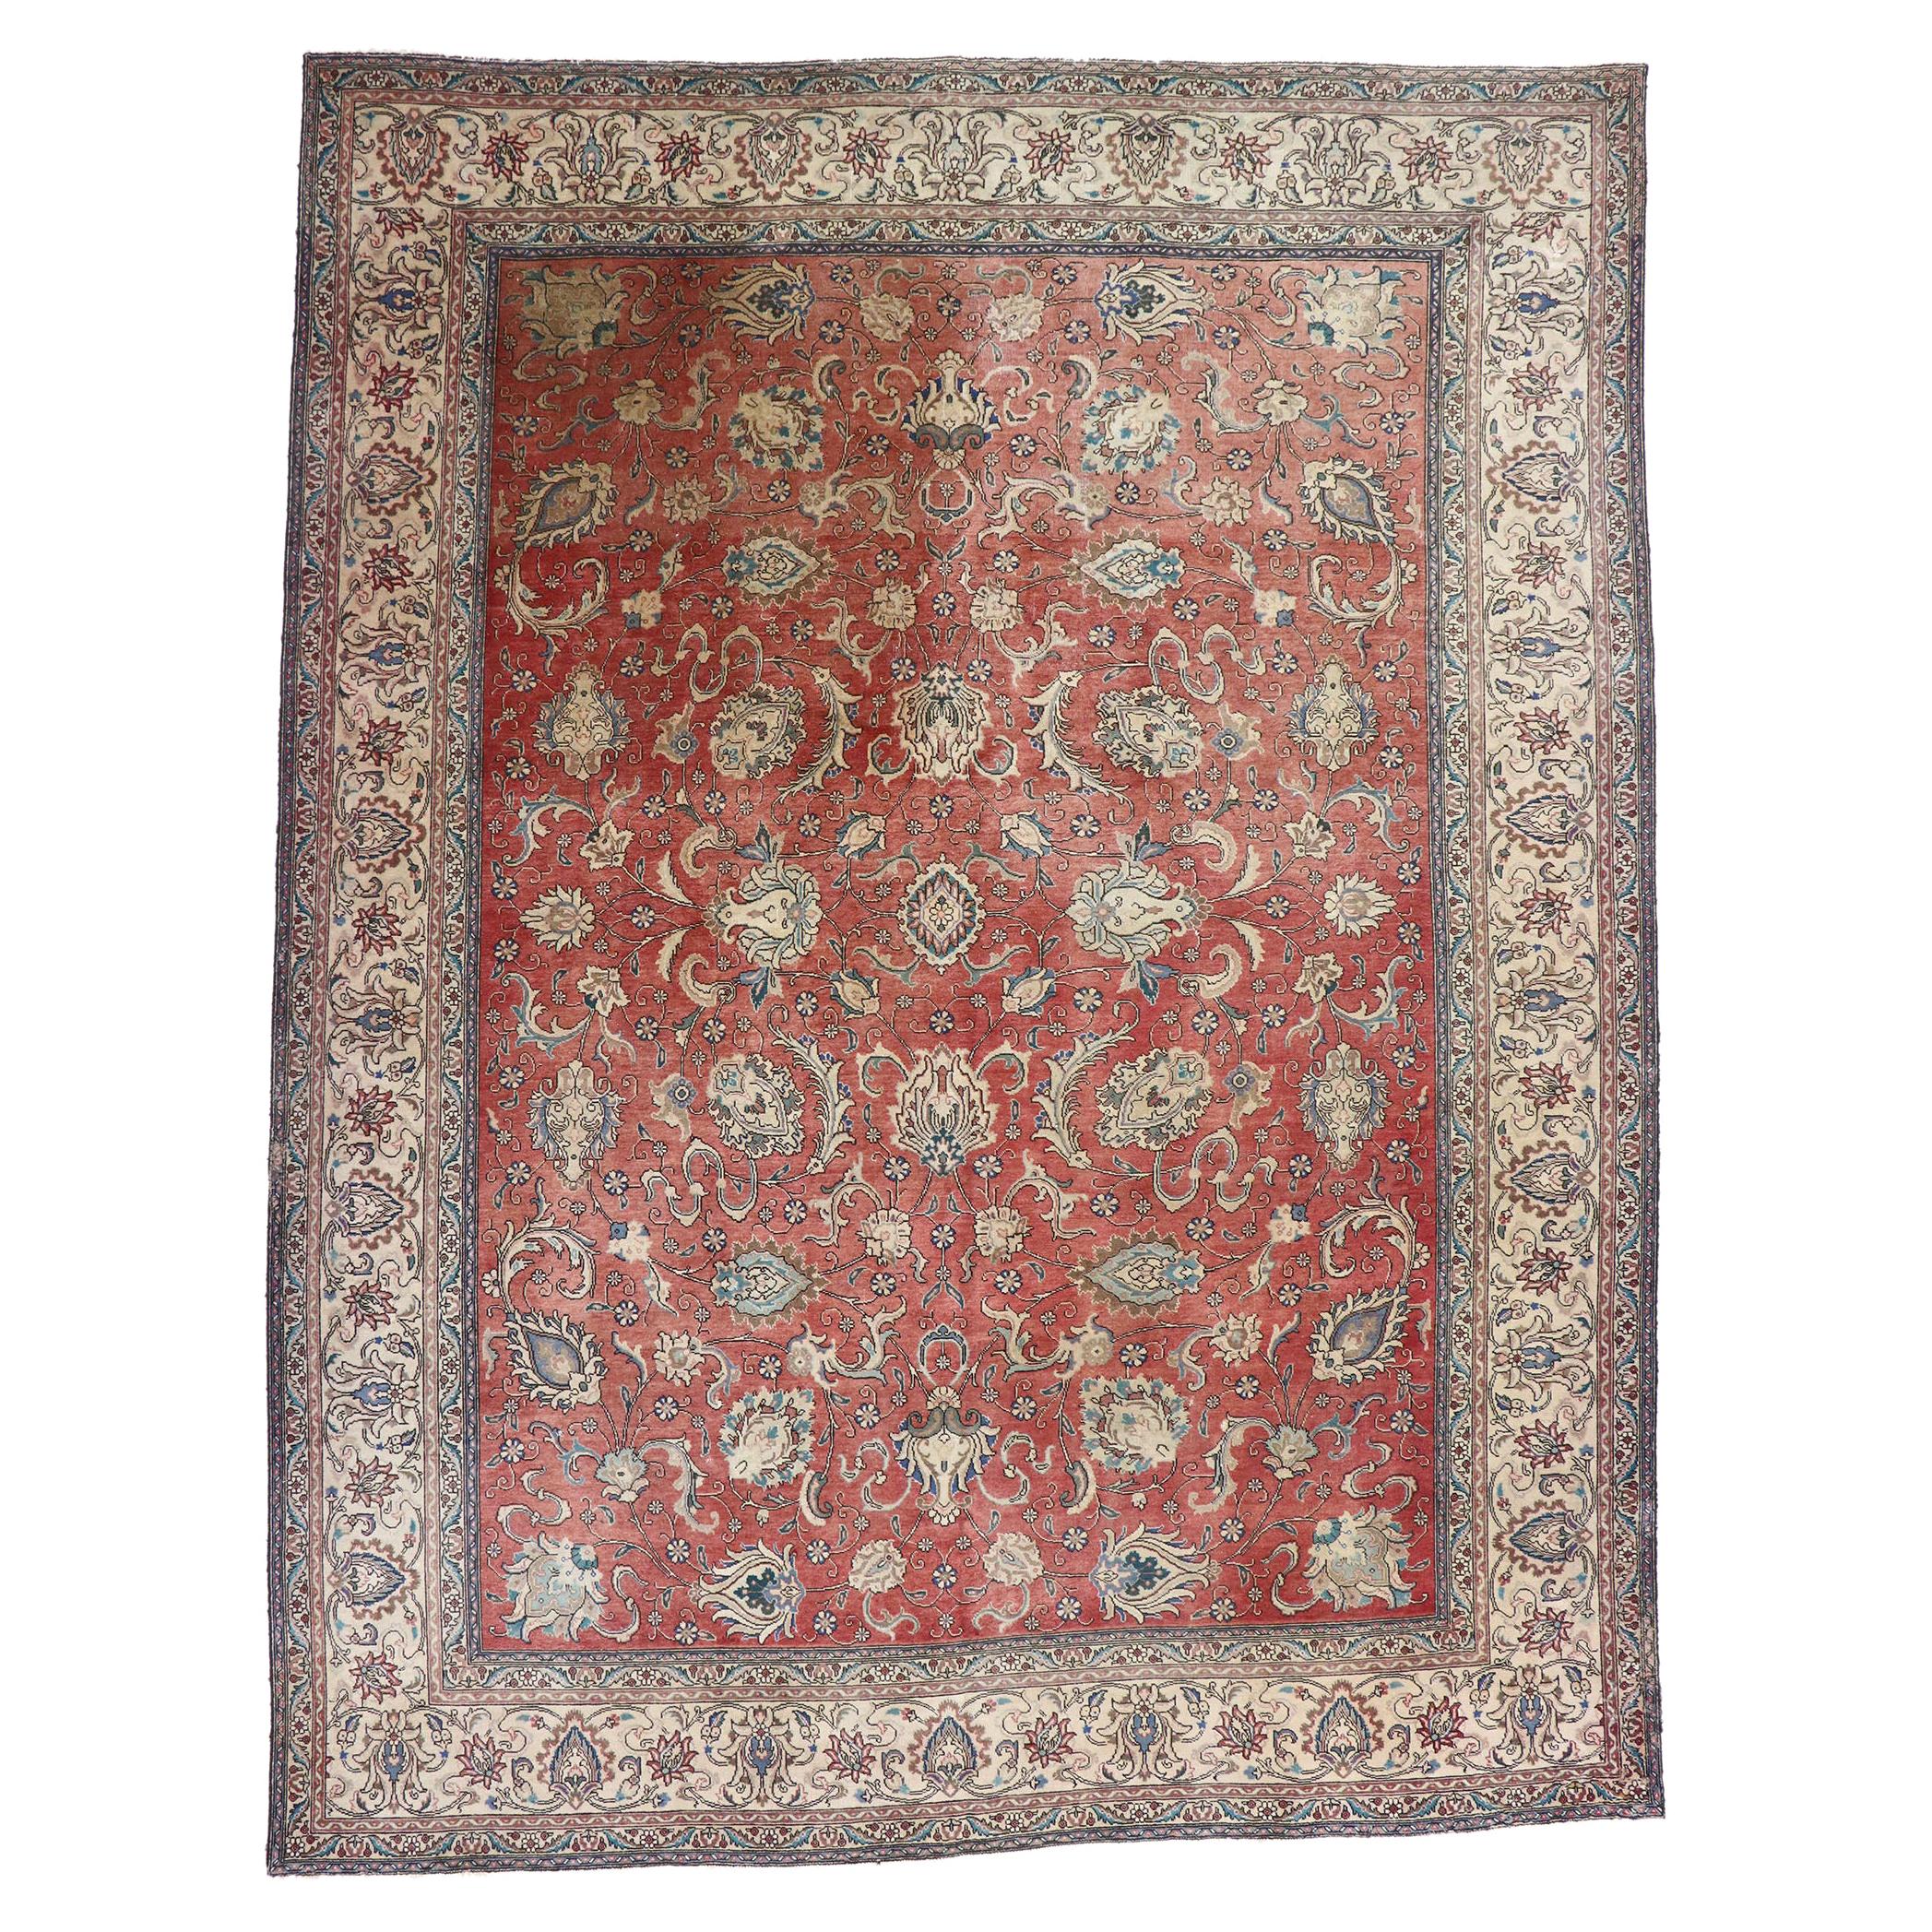 Antique Persian Tabriz Rug with Rustic Federal Style For Sale